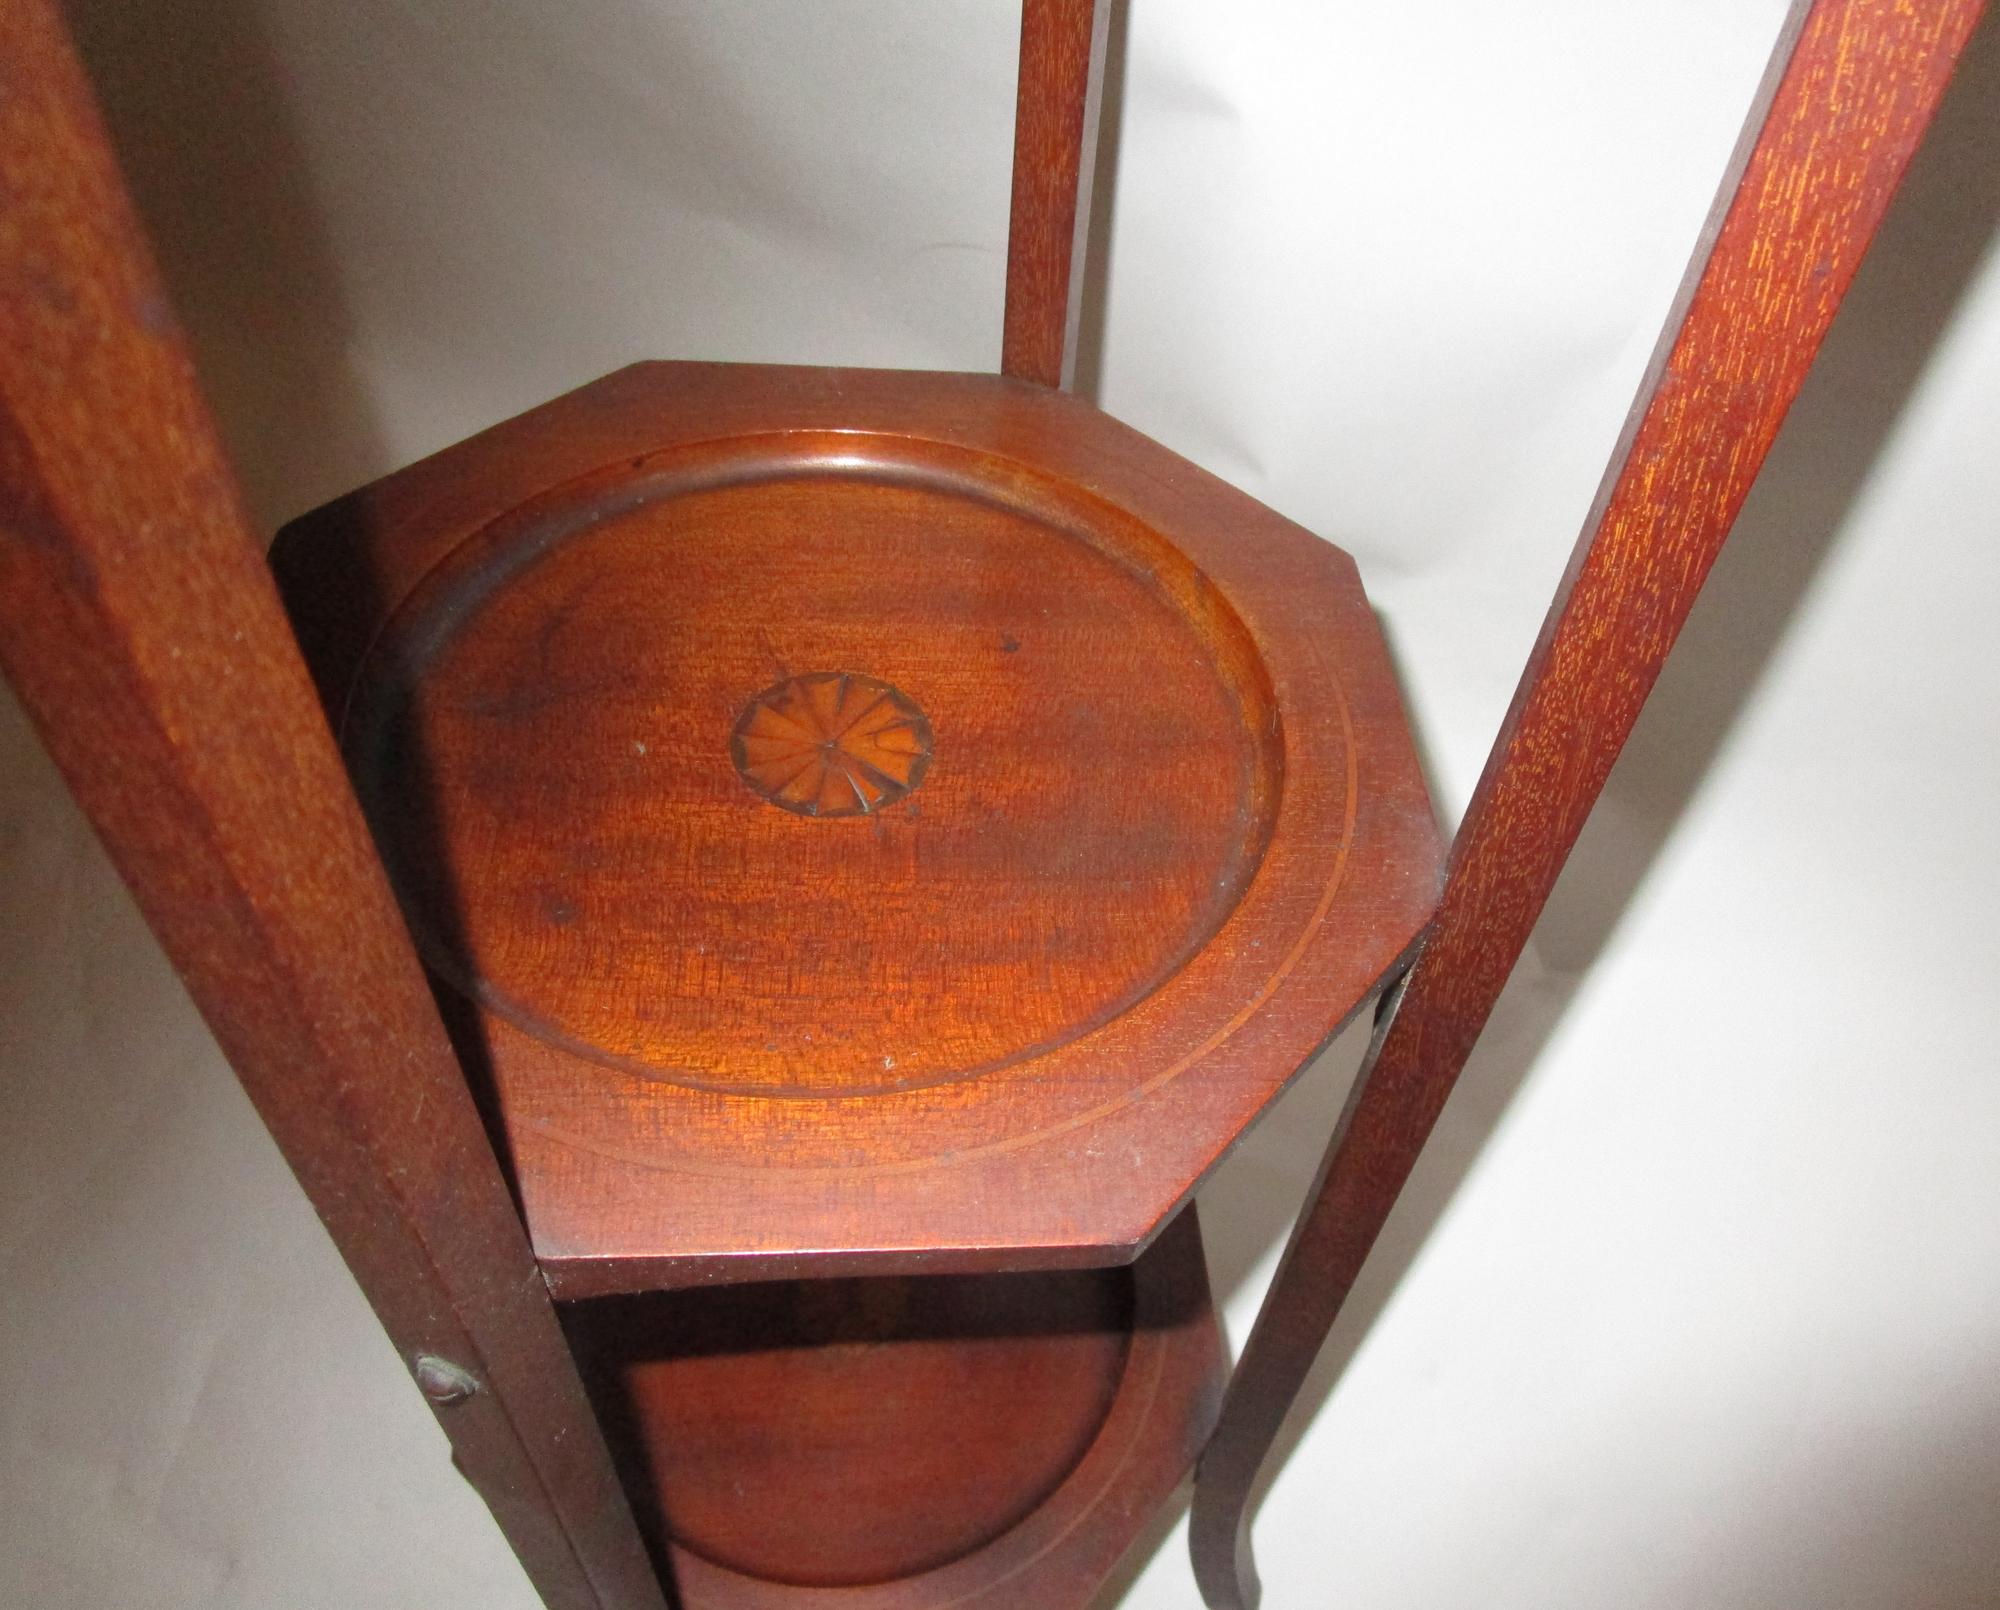 19th century Regency Mahogany Side Table or Muffin Stand (Intarsie)